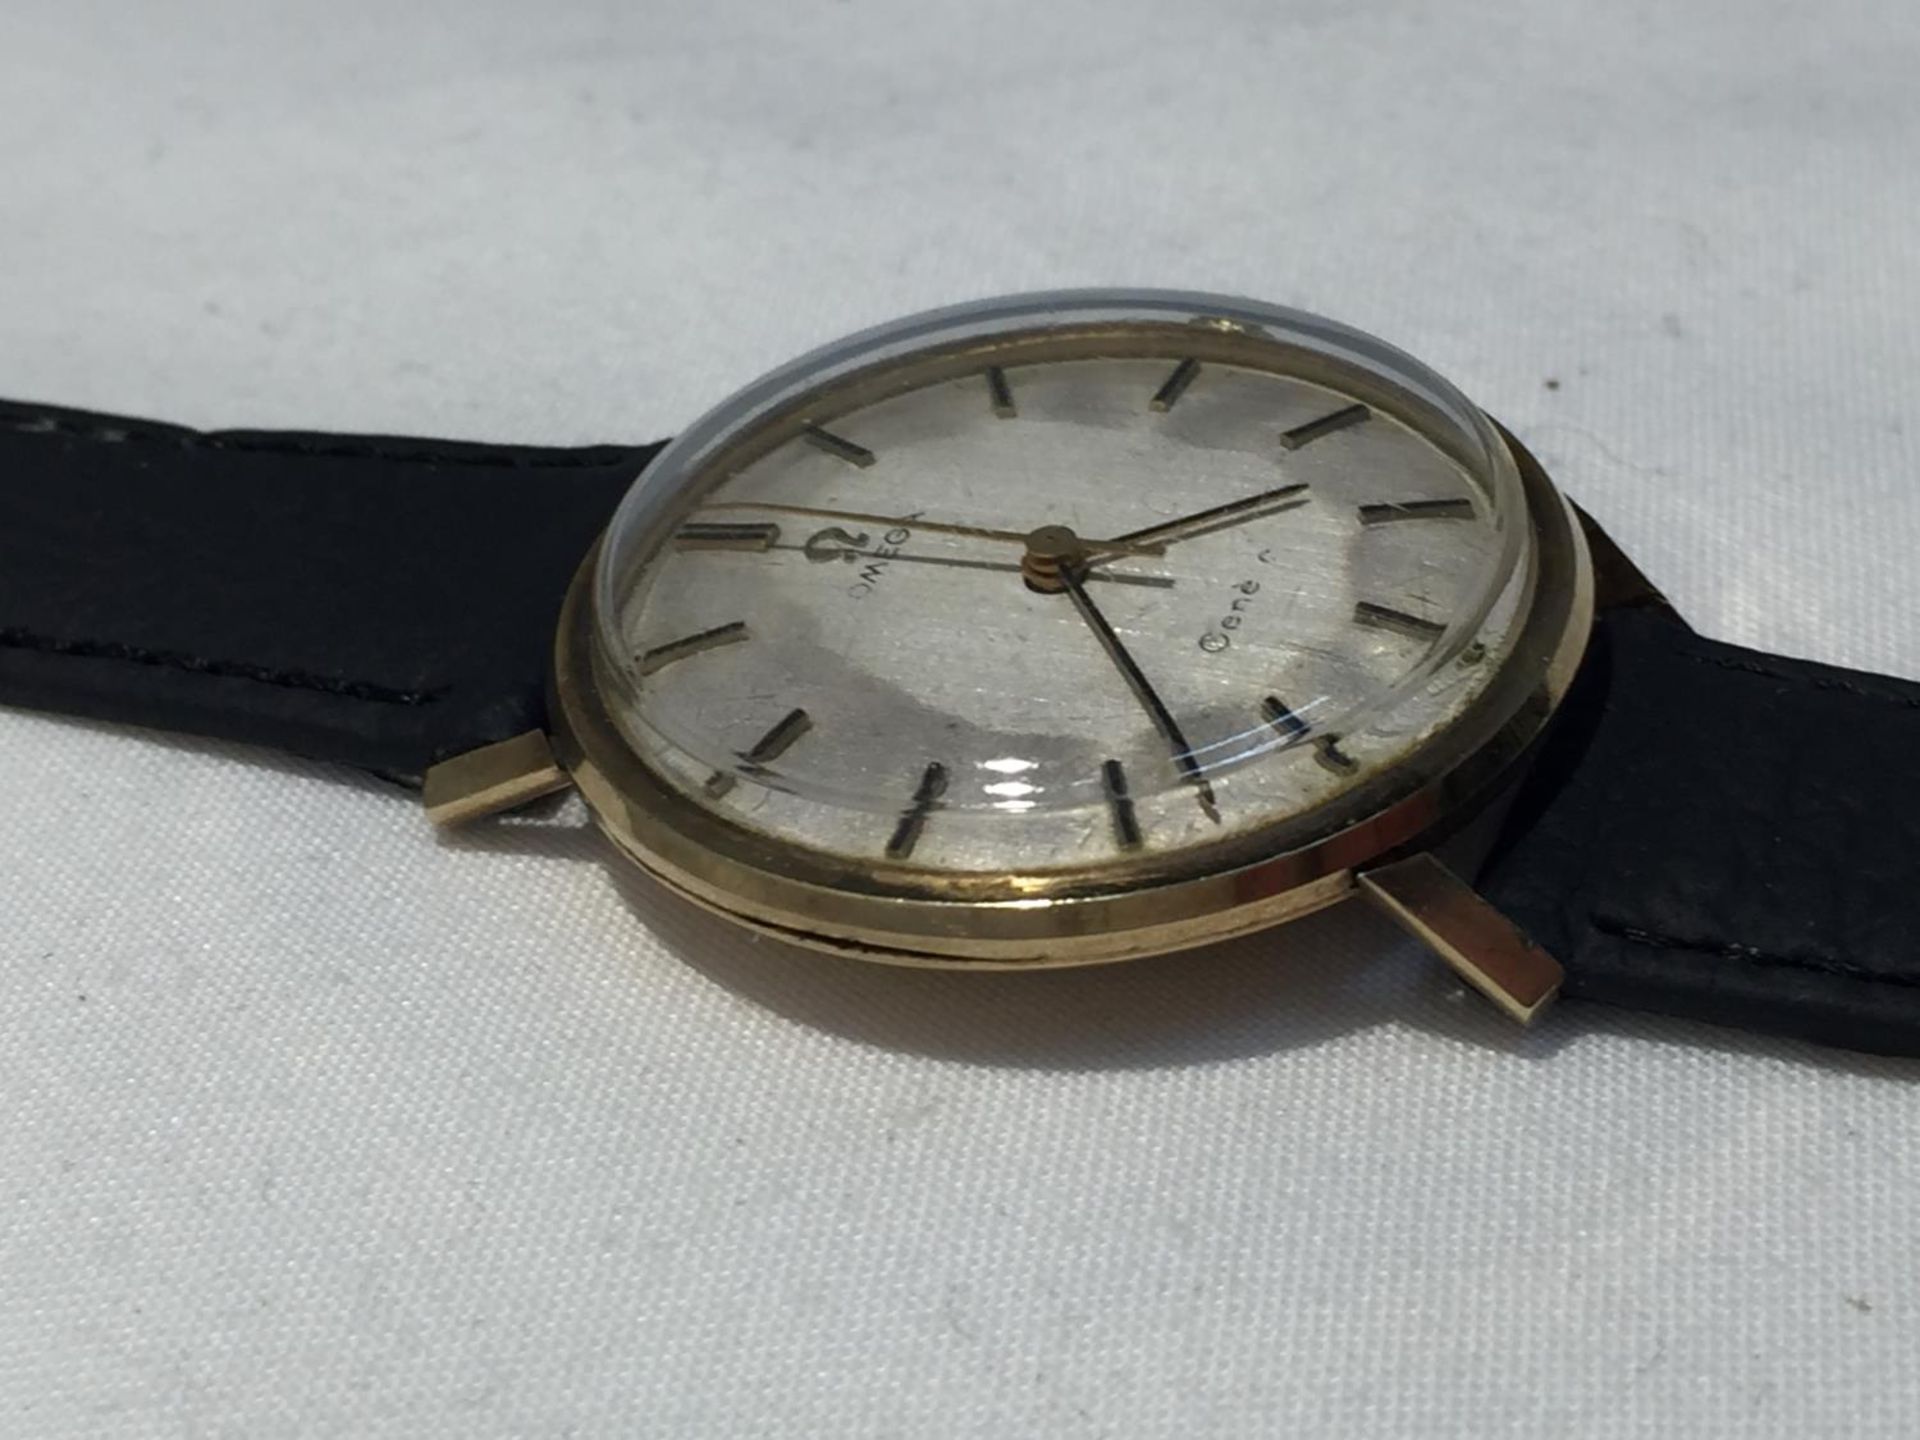 AN OMEGA GENTLEMAN'S WRIST WATCH WITH 9 CARAT GOLD CASE AND LEATHER STRAP - Image 9 of 9